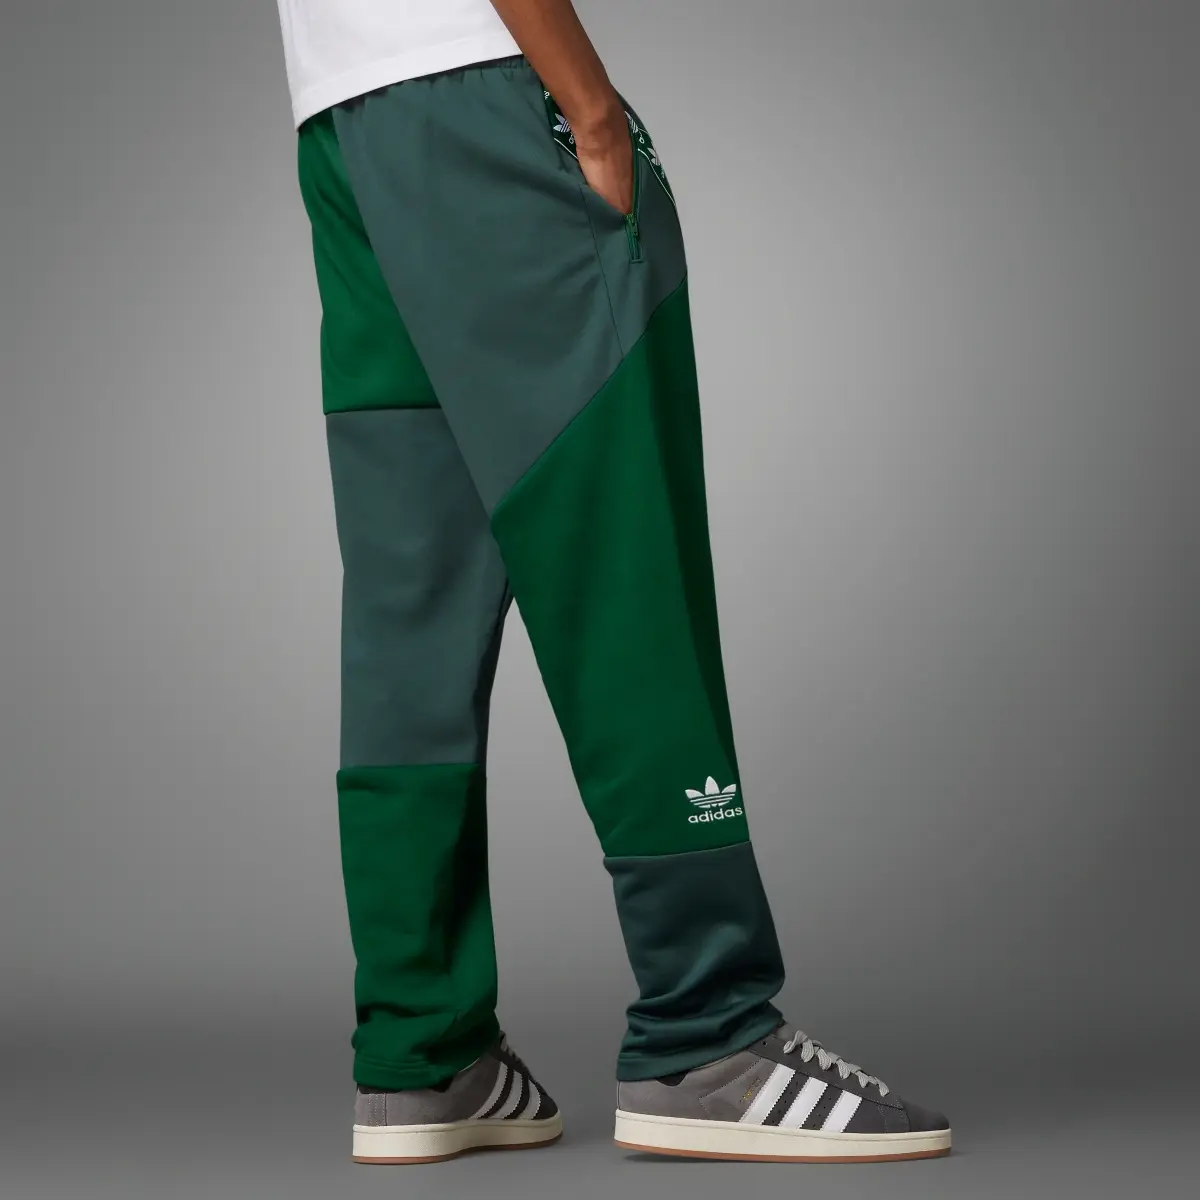 Adidas ADC Patchwork FB Joggers. 2